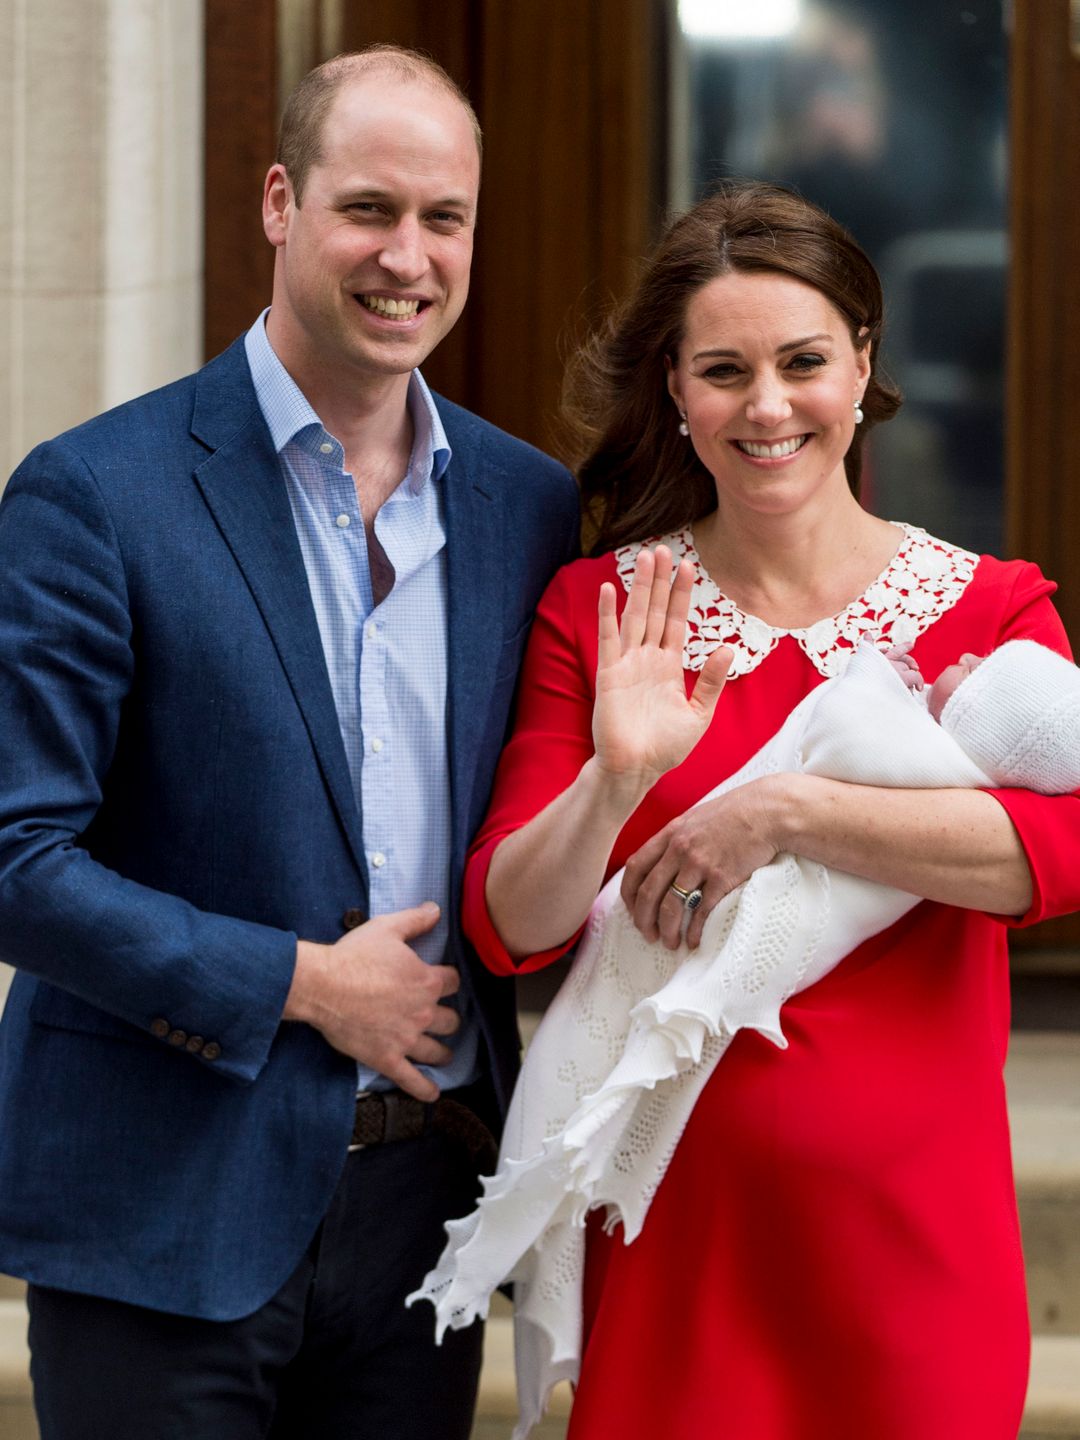 William and Kate leave with their newborn baby boy Prince Louis in April 2018